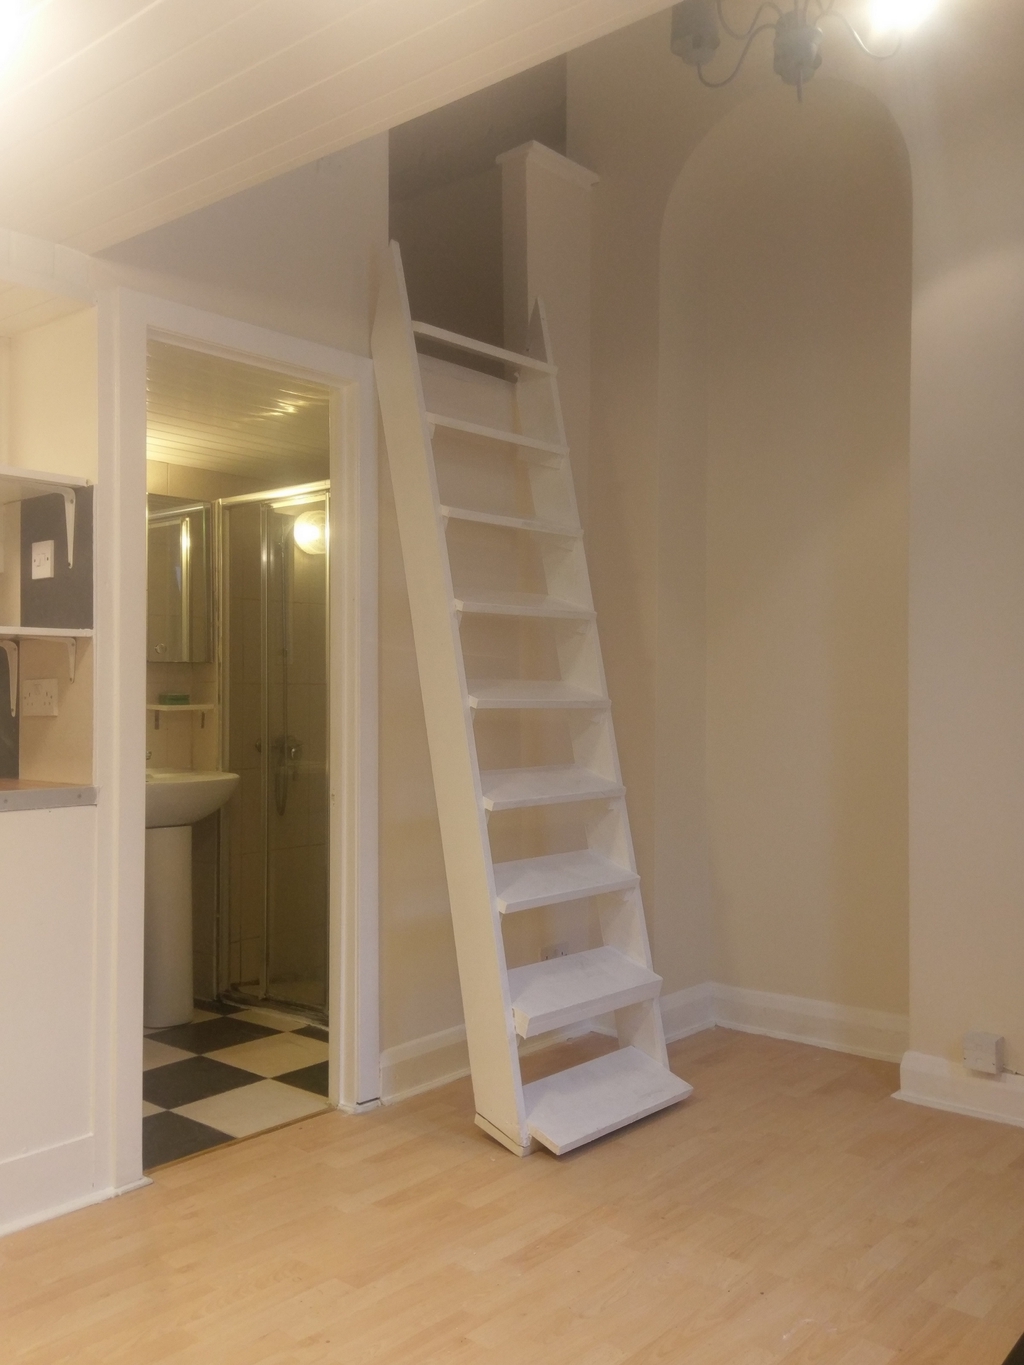 Flat to rent in , London, W10